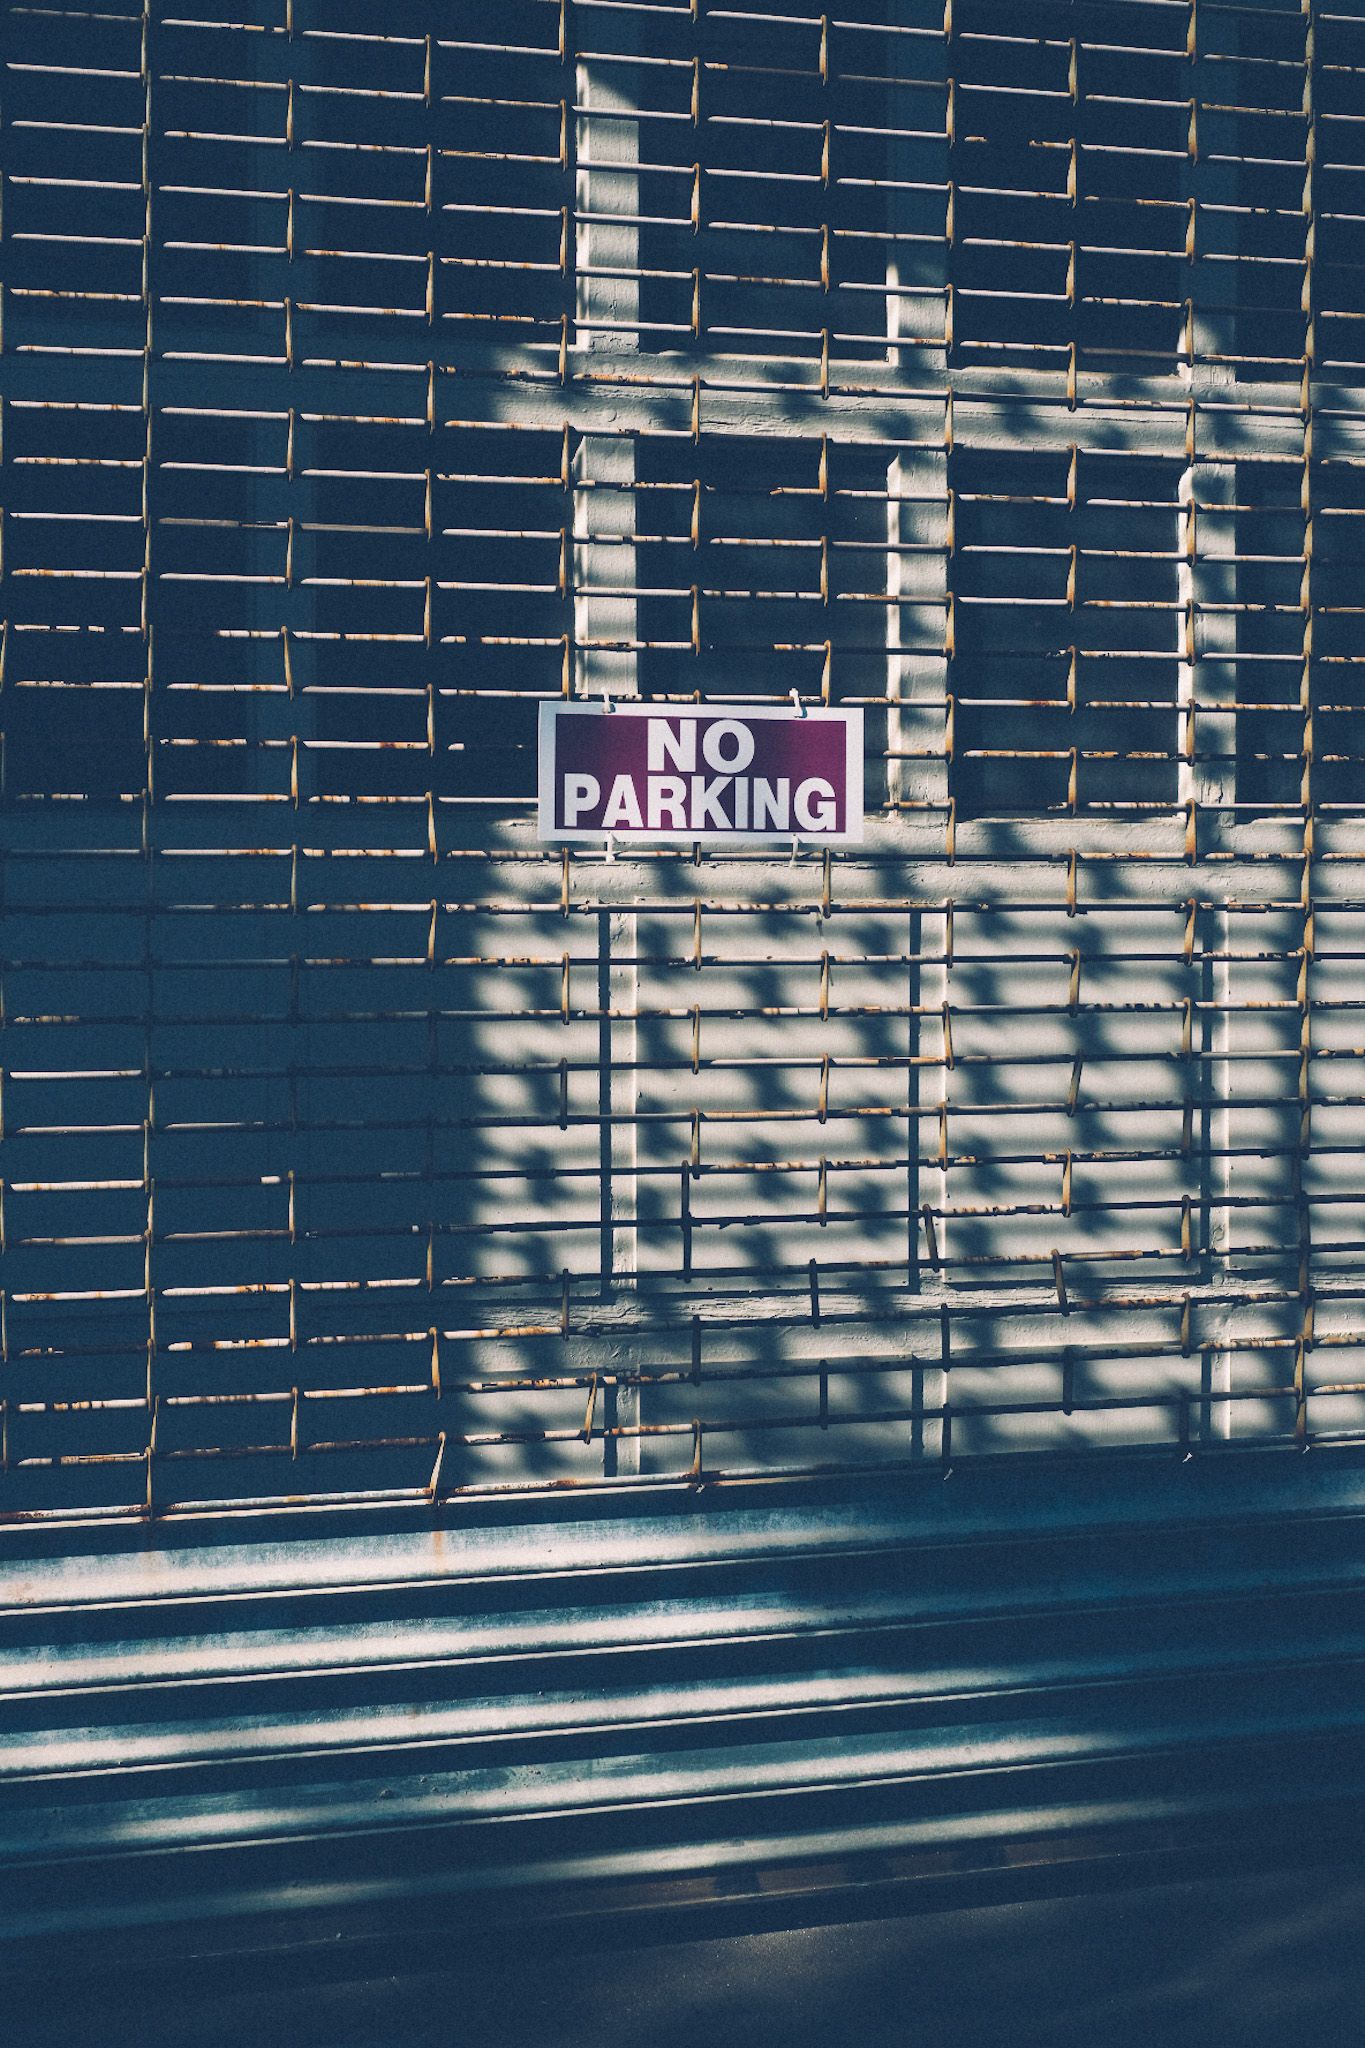 A burgundy sign saying “no parking” is placed in the center of a white grated shutter of a storefront. The afternoon shadow is lovely.